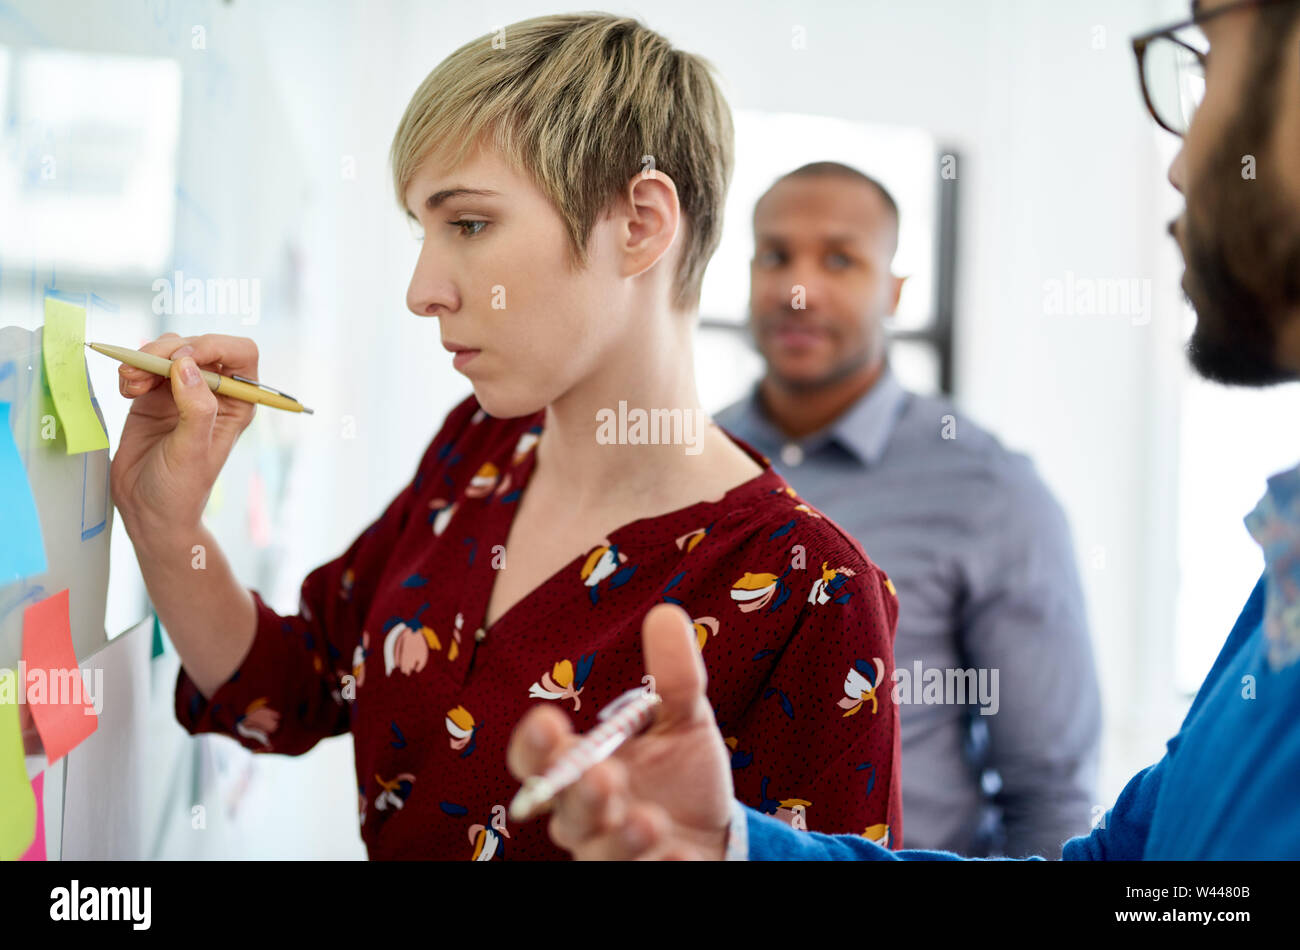 Platinum pixie cut female boss led multi-ethnic group hipster trendy business people during a brainstorm session for their small company Stock Photo